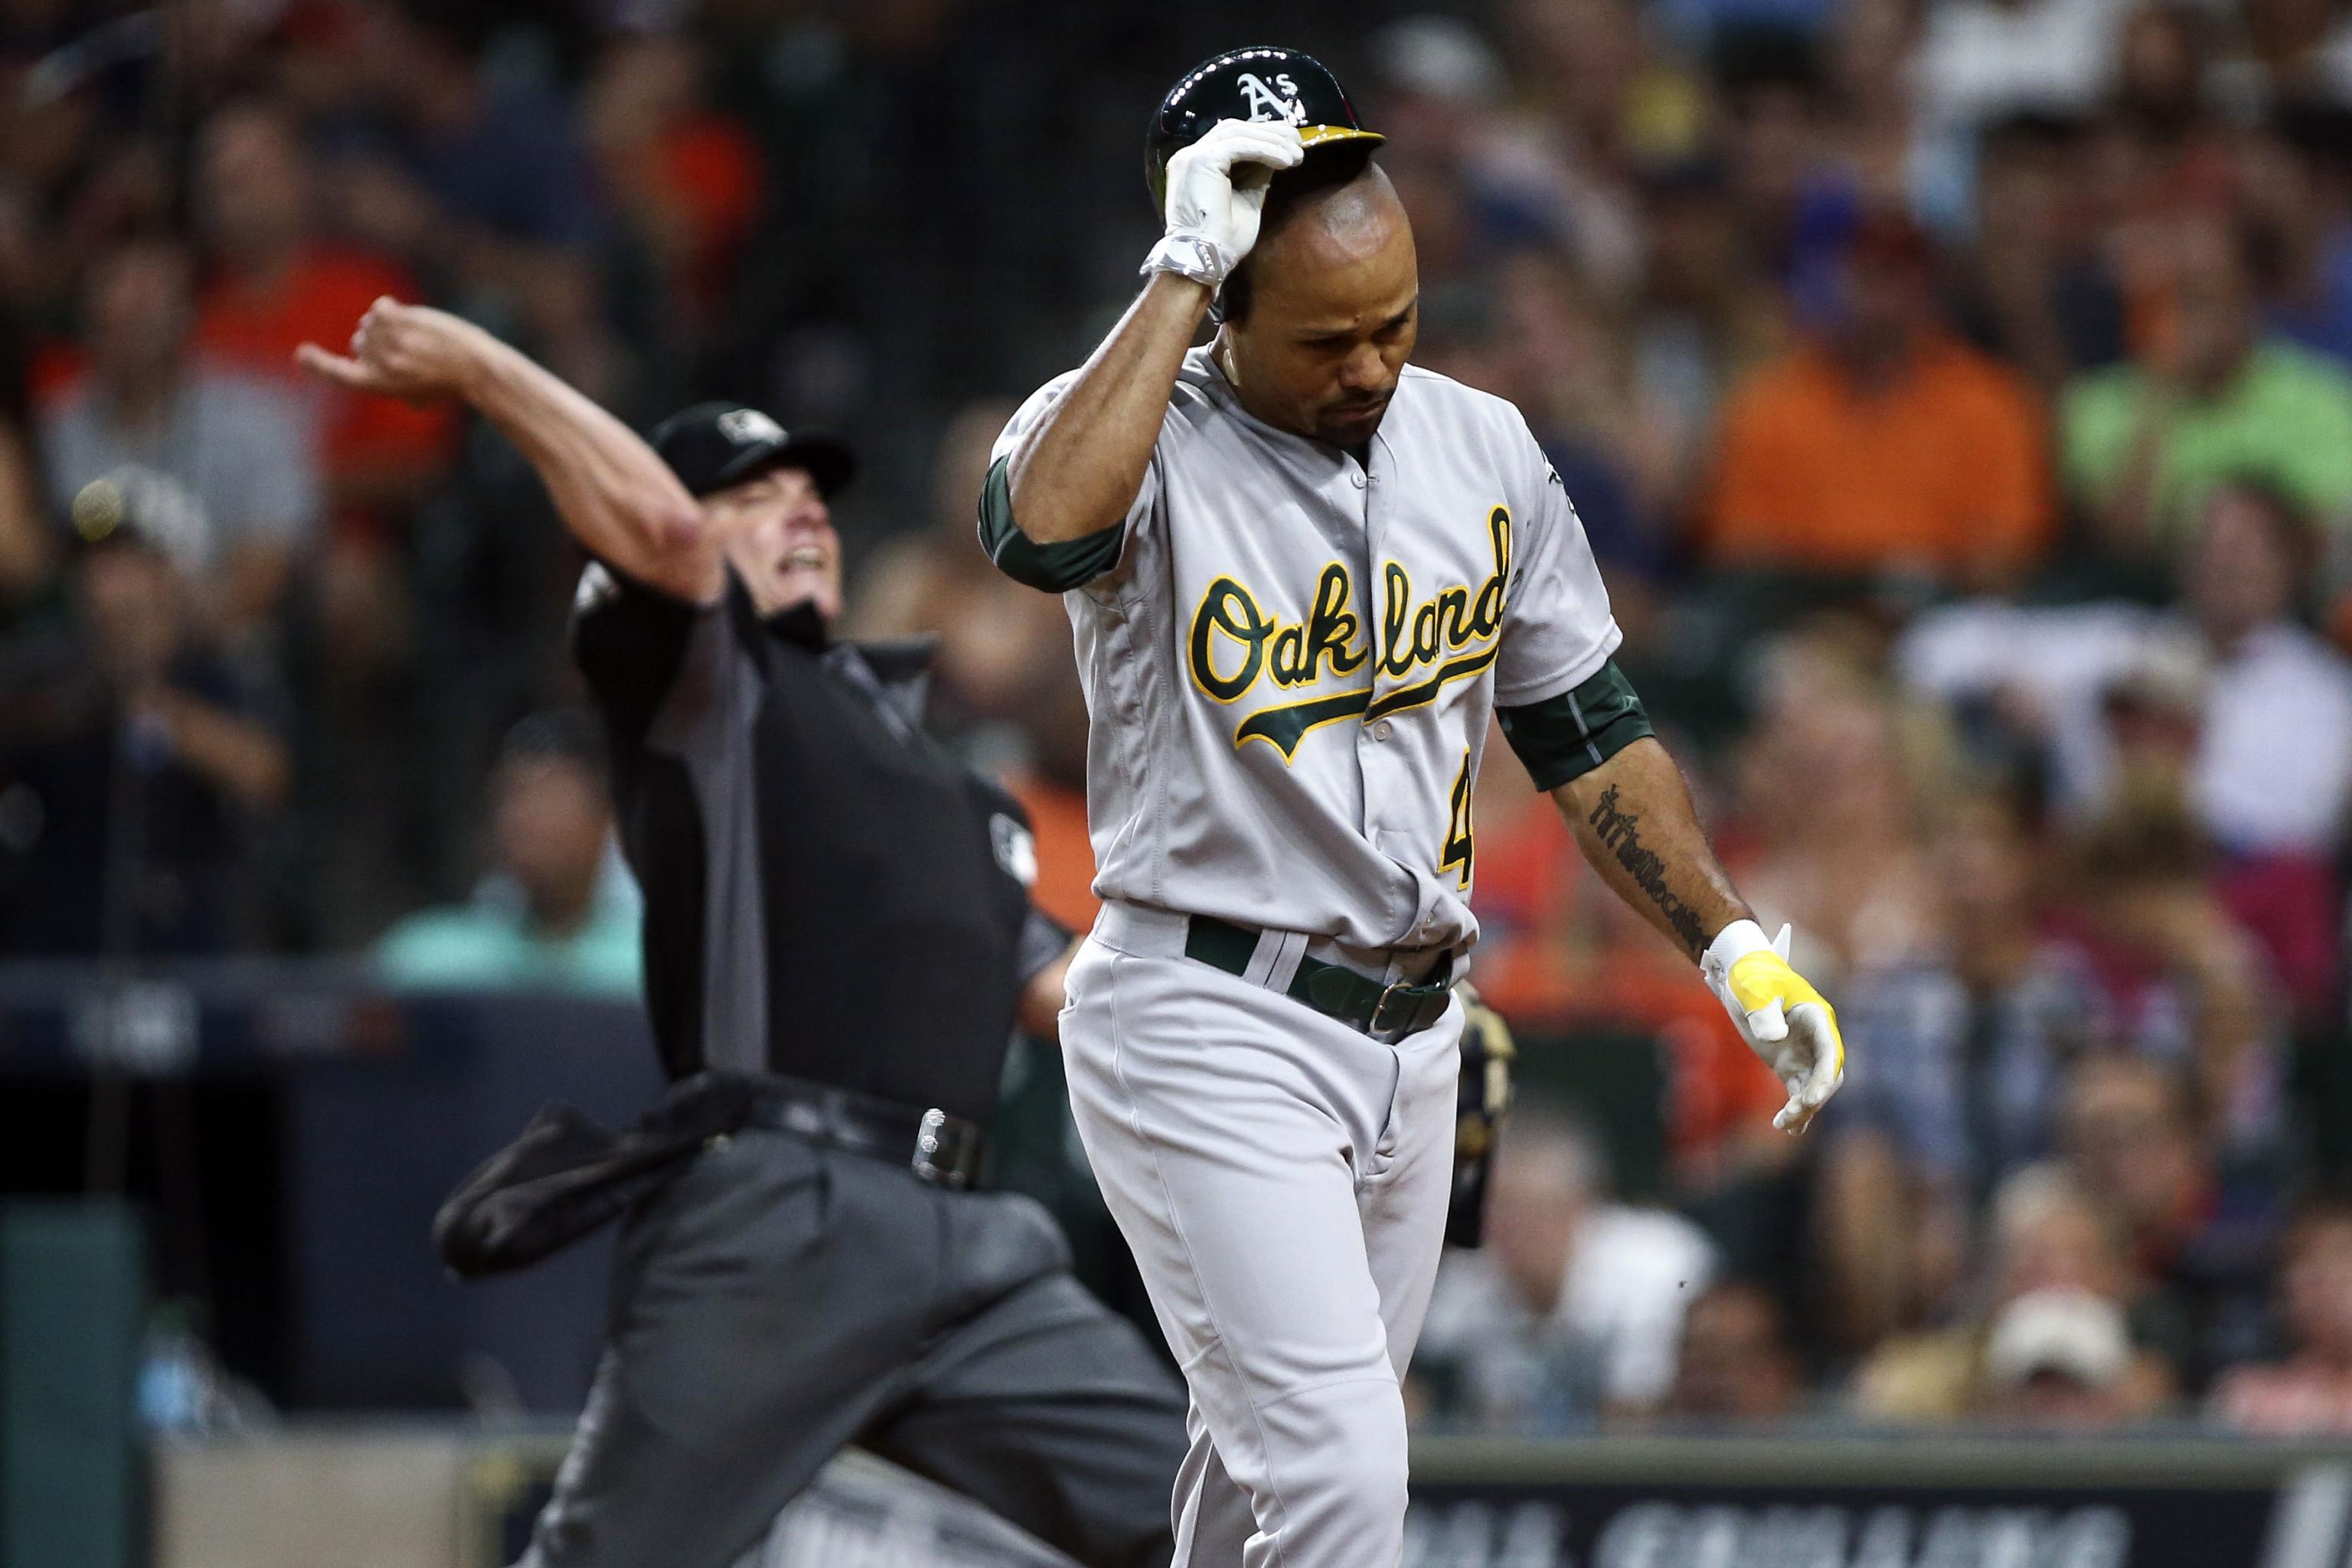 Report: Coco Crisp may return to Oakland A's – The Mercury News